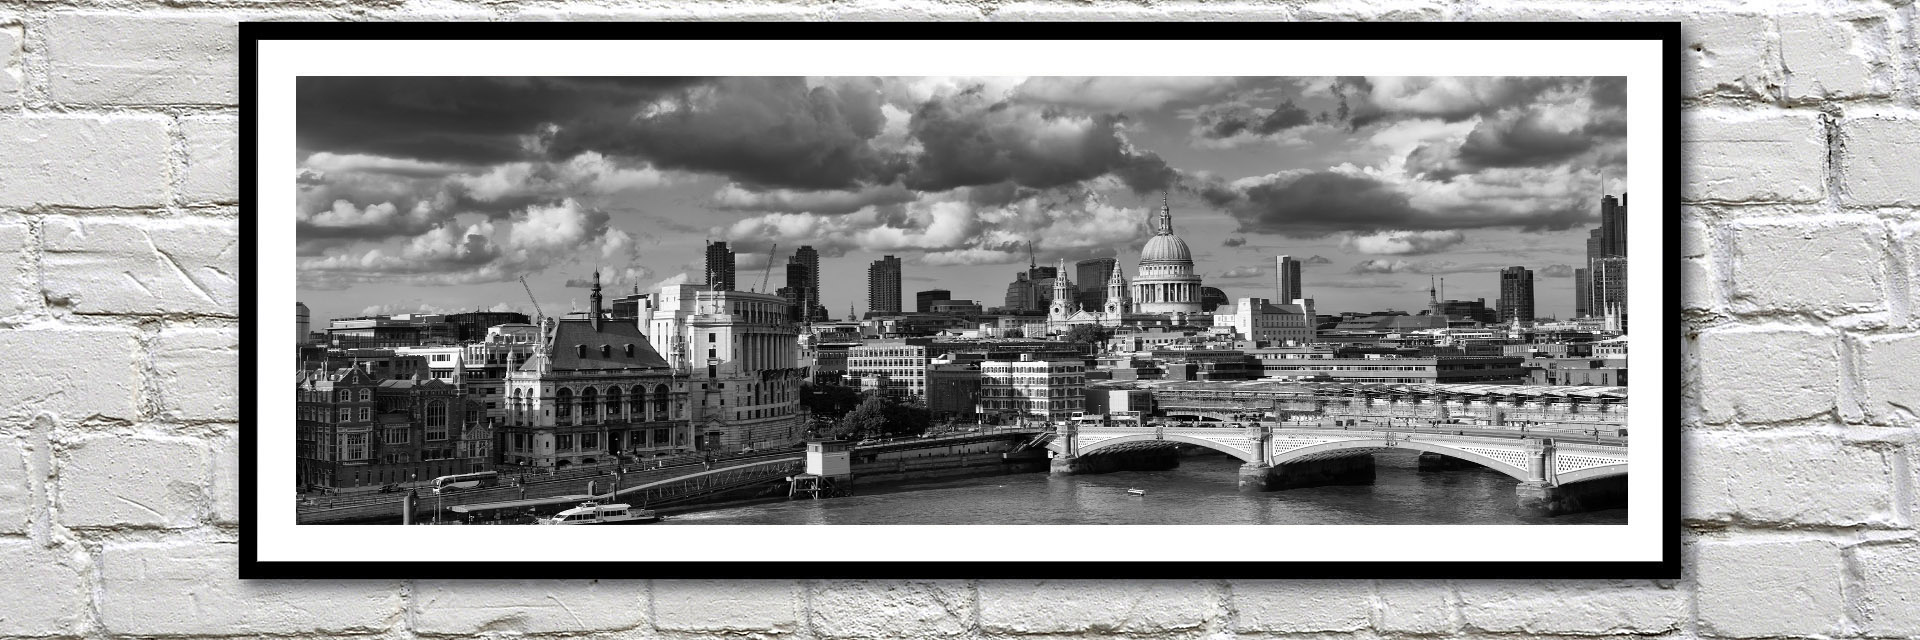 Office art ideas - prints of the buildings in the historic city of London